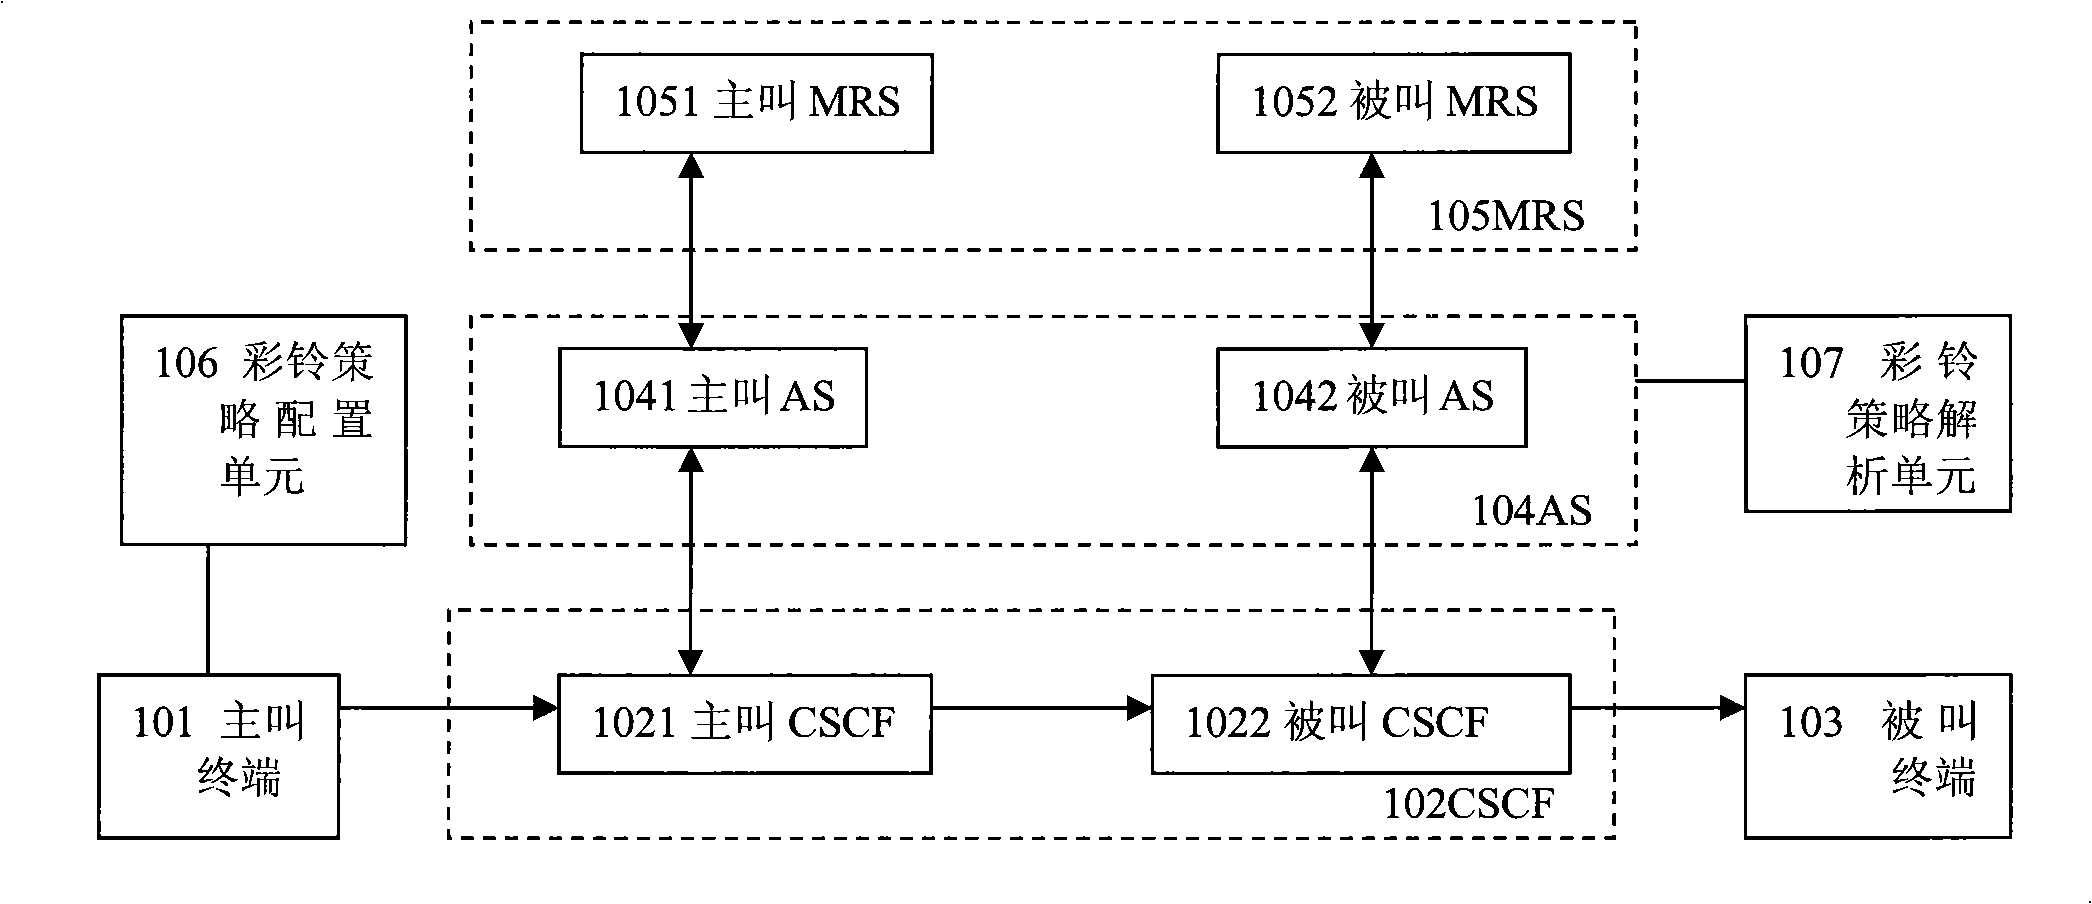 Method, system and apparatus for implementing multimedia customized ring back tone service